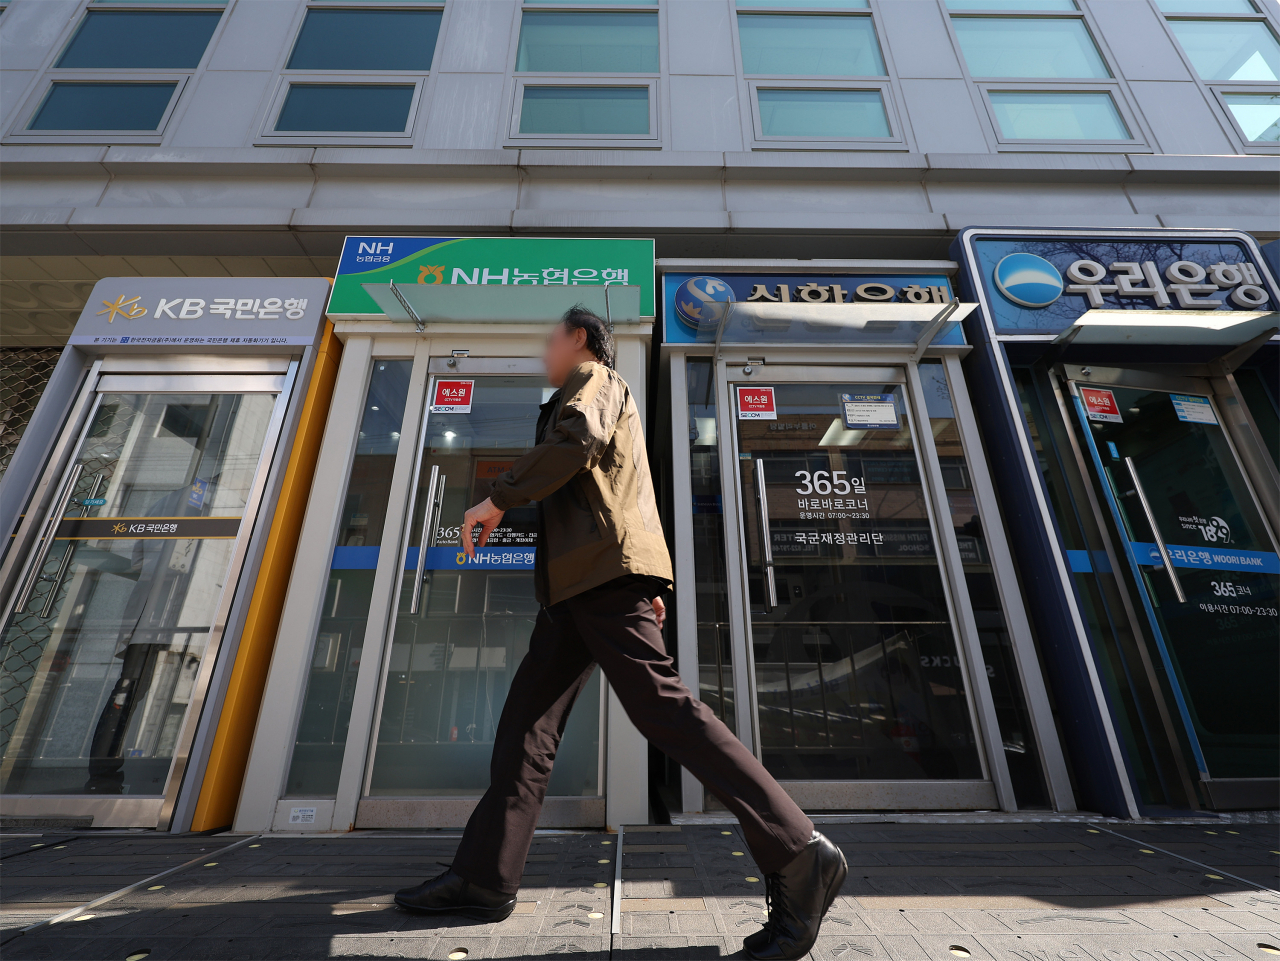 A man walks by ATMs of local banks installed on a street in Seoul on April 9. (Yonhap)